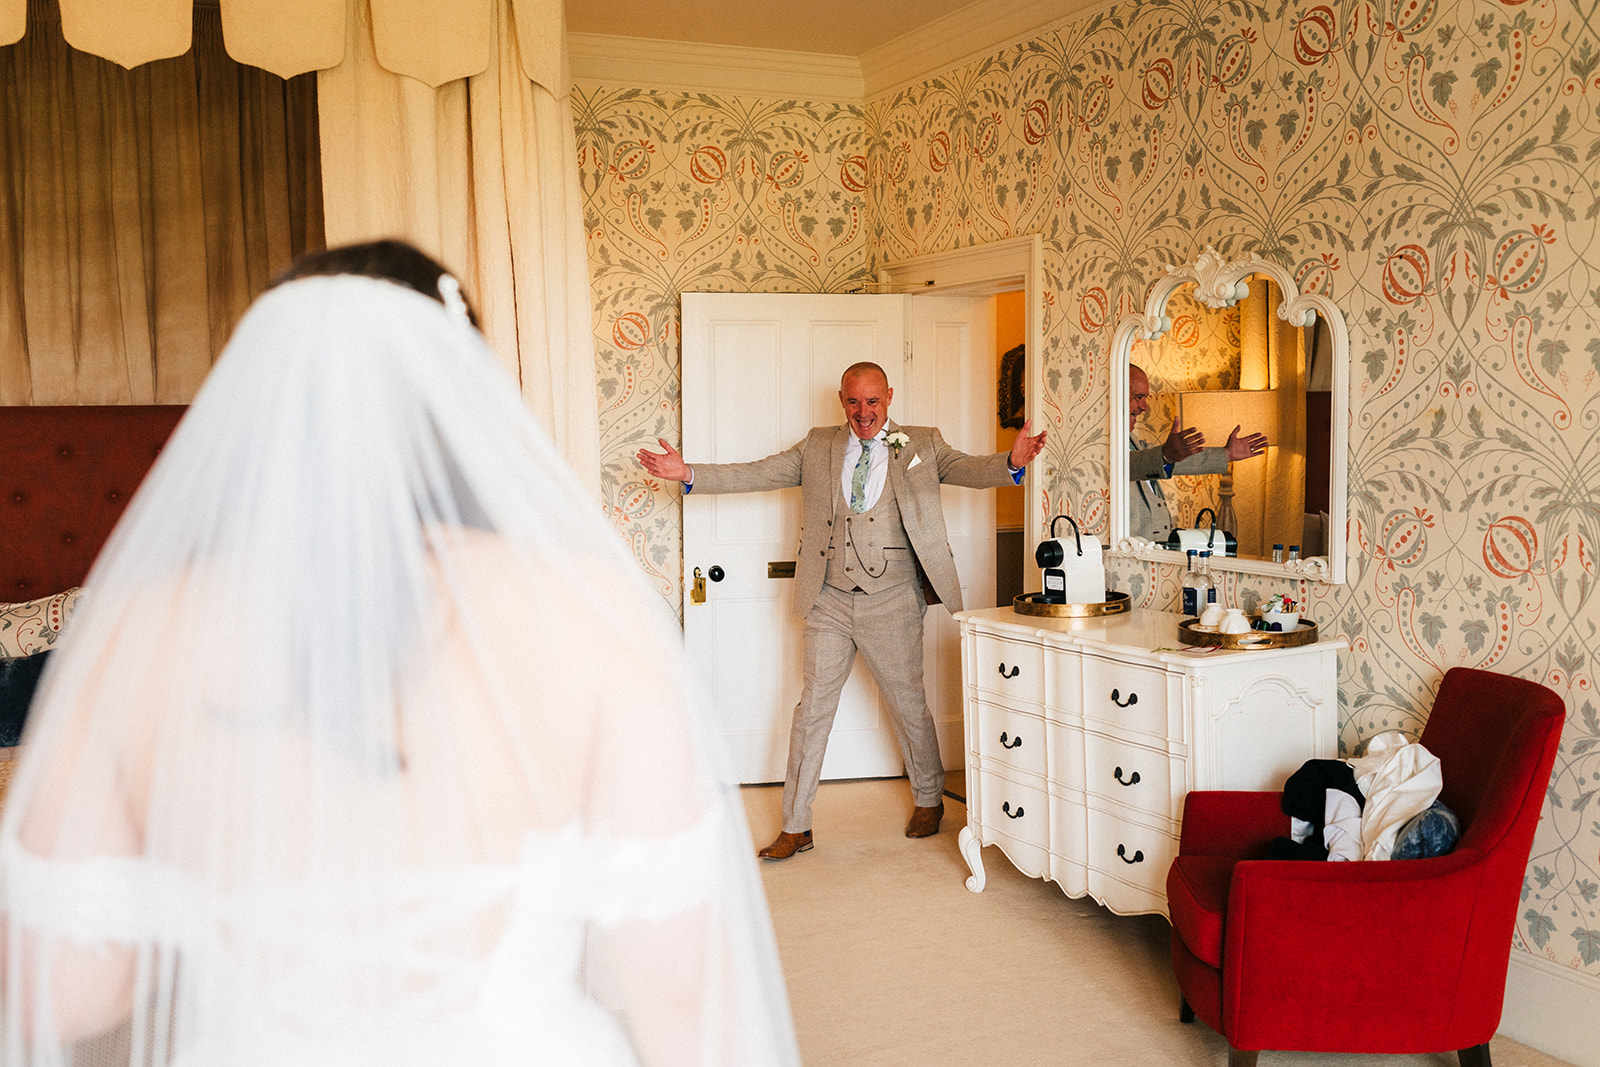 The father of the bride is amazing reaction to see his daughter in her wedding dress